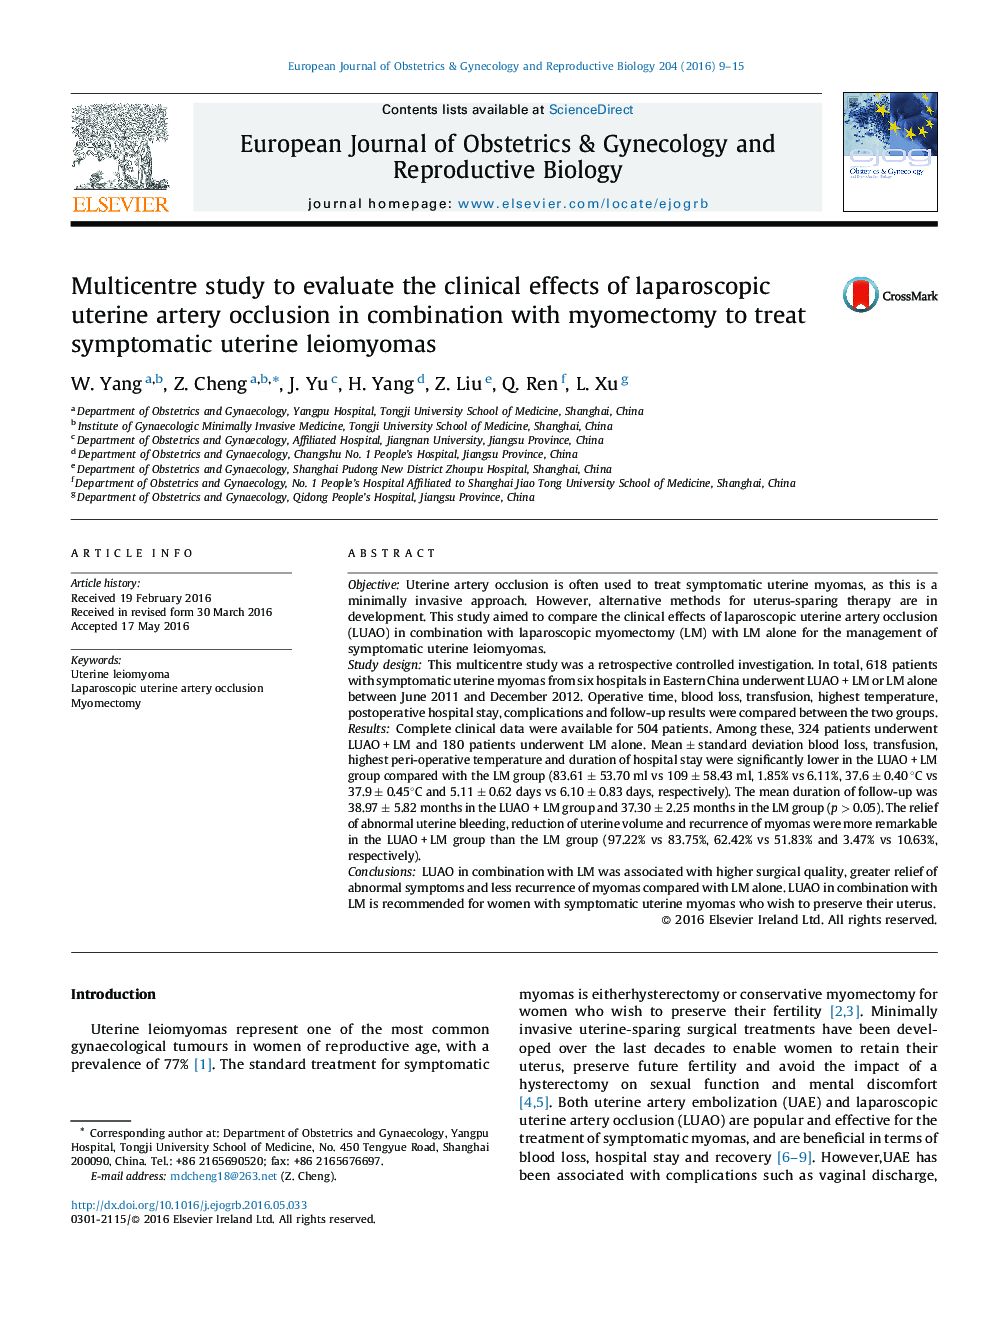 Multicentre study to evaluate the clinical effects of laparoscopic uterine artery occlusion in combination with myomectomy to treat symptomatic uterine leiomyomas